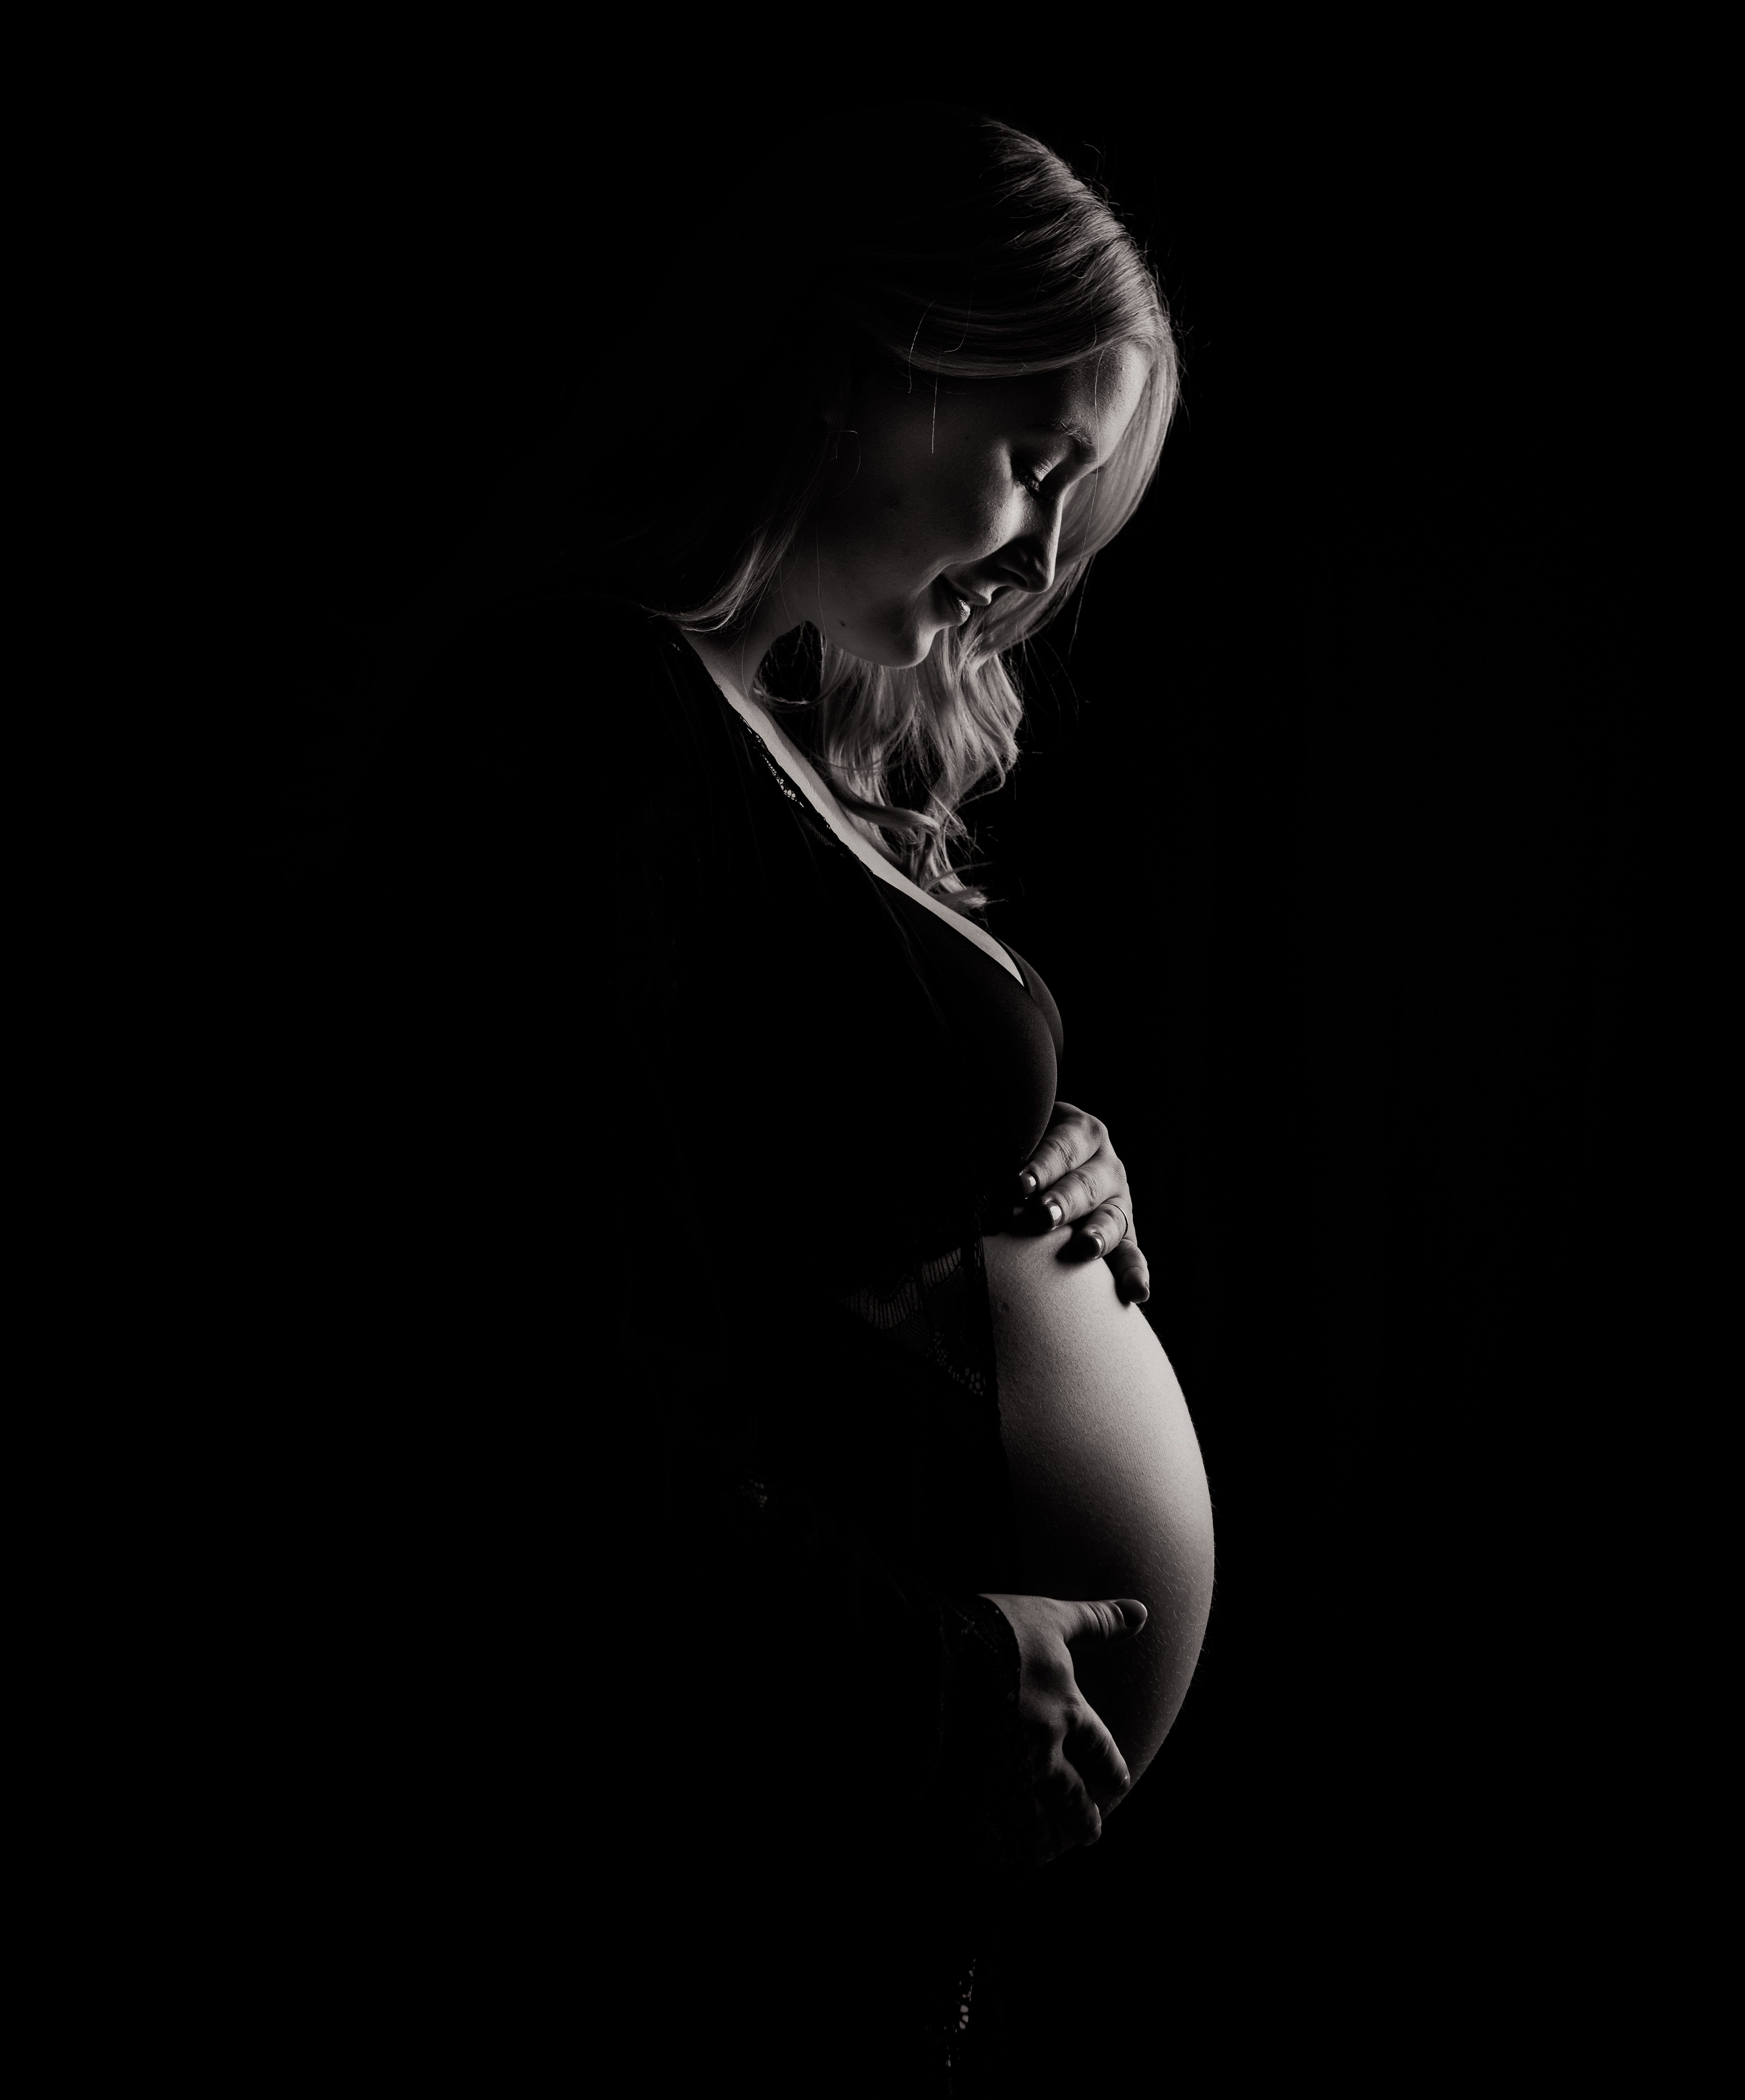 A pregnant woman touching her baby bump. | Source: Unsplash